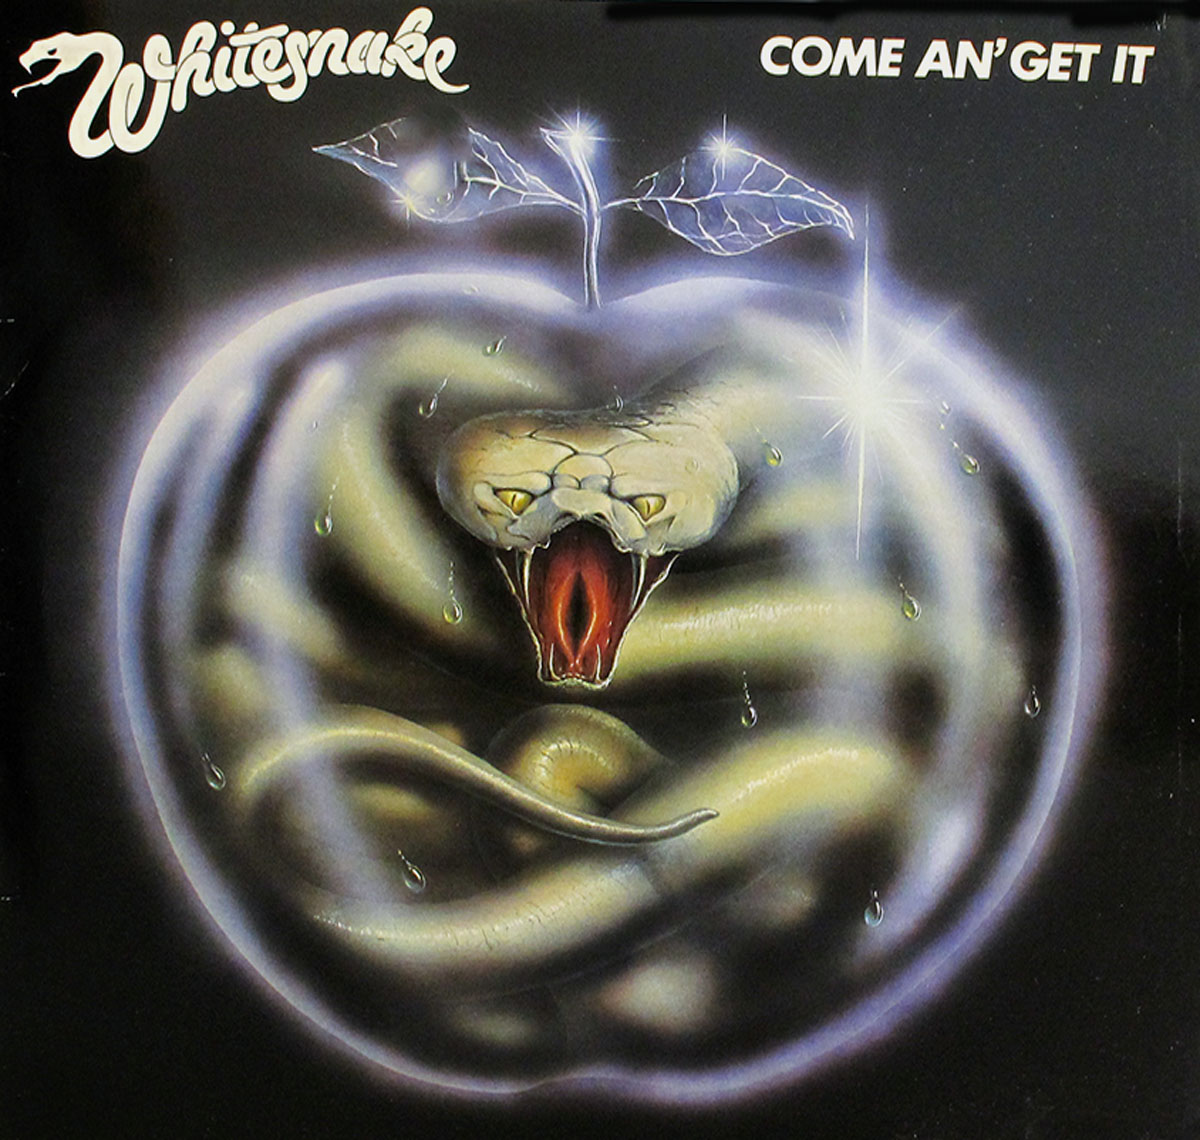 High Resolution Photos of whitesnake come get it 